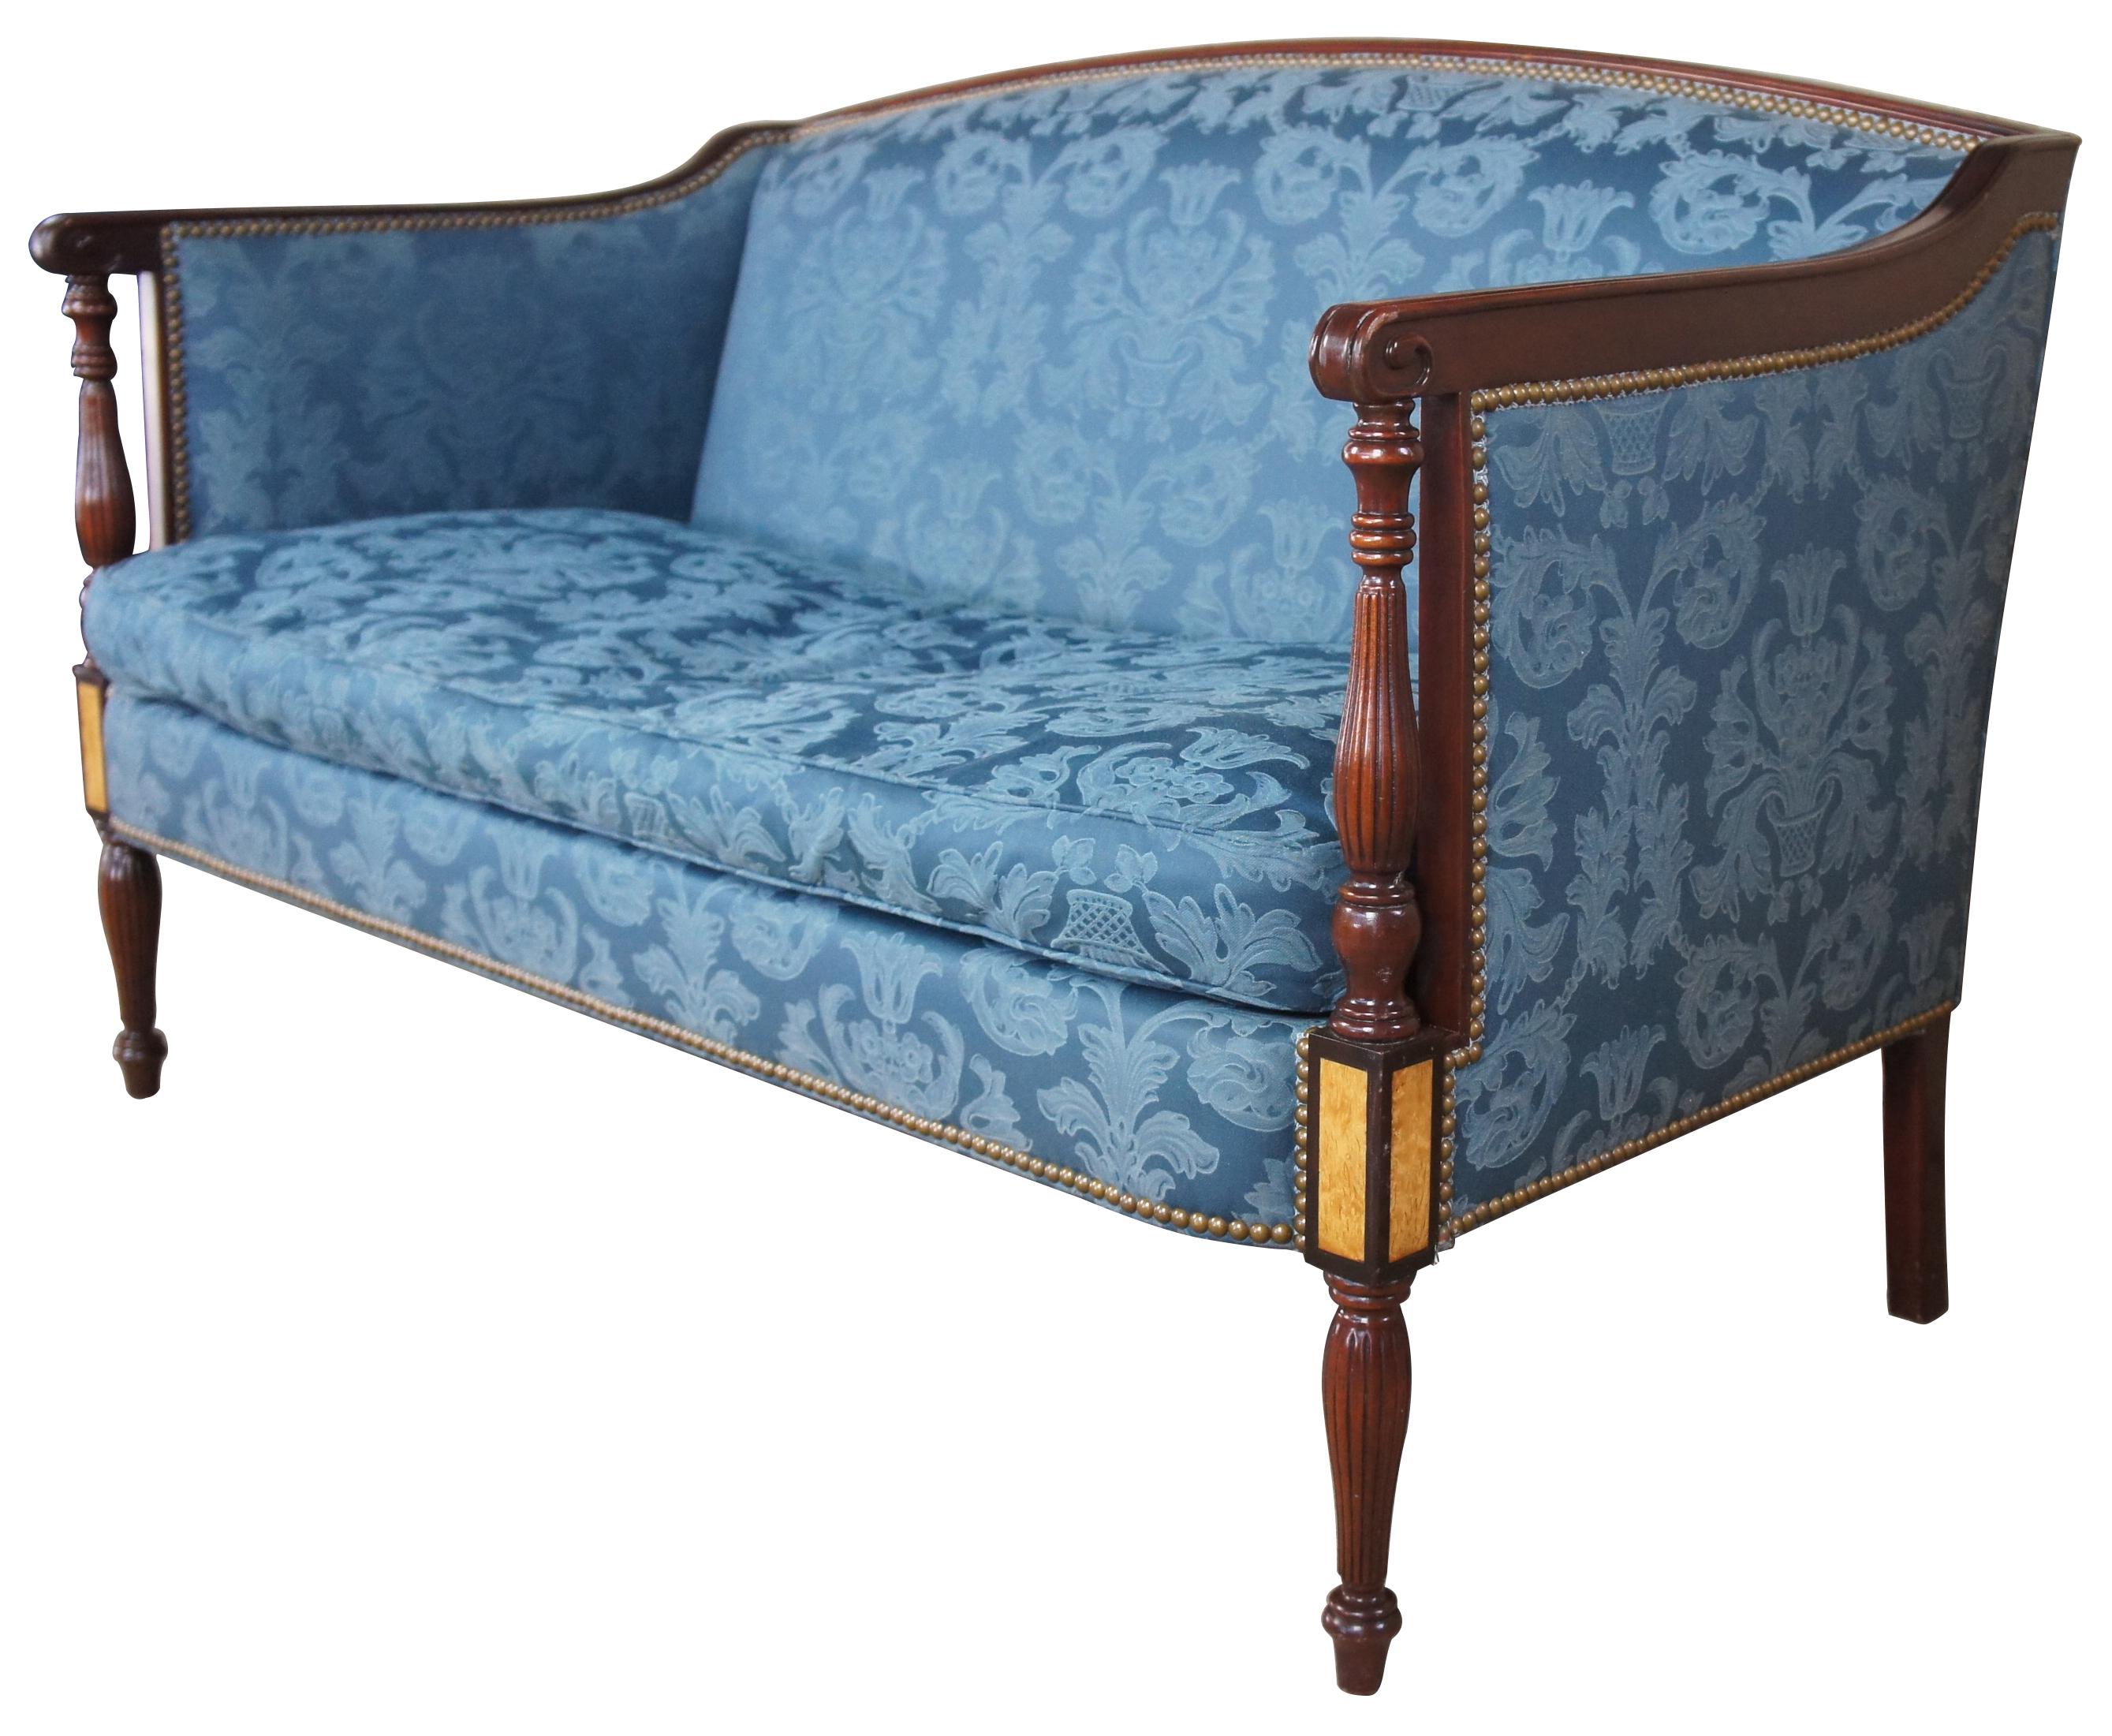 James River plantation Sheraton mahogany settee loveseat by Hickory Chair Co

Blue Sheraton loveseat. Historical James River Plantation collection item # 1844-00 by Hickory Chair Company. The graceful, slender, reeded and tapered legs make this